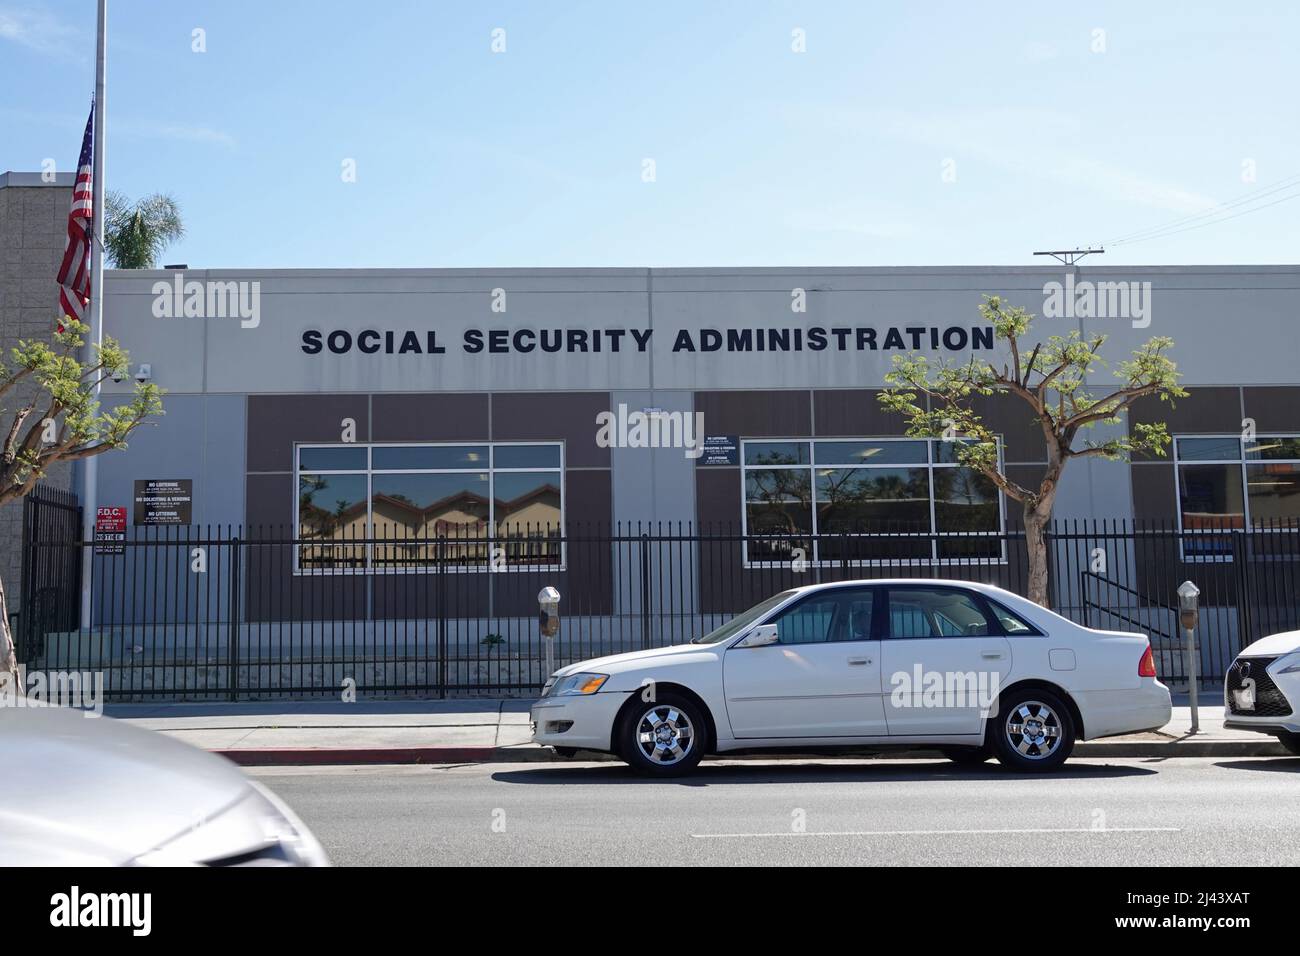 The exterior of a Social Security Administration building is shown in the USA during the day. Stock Photo